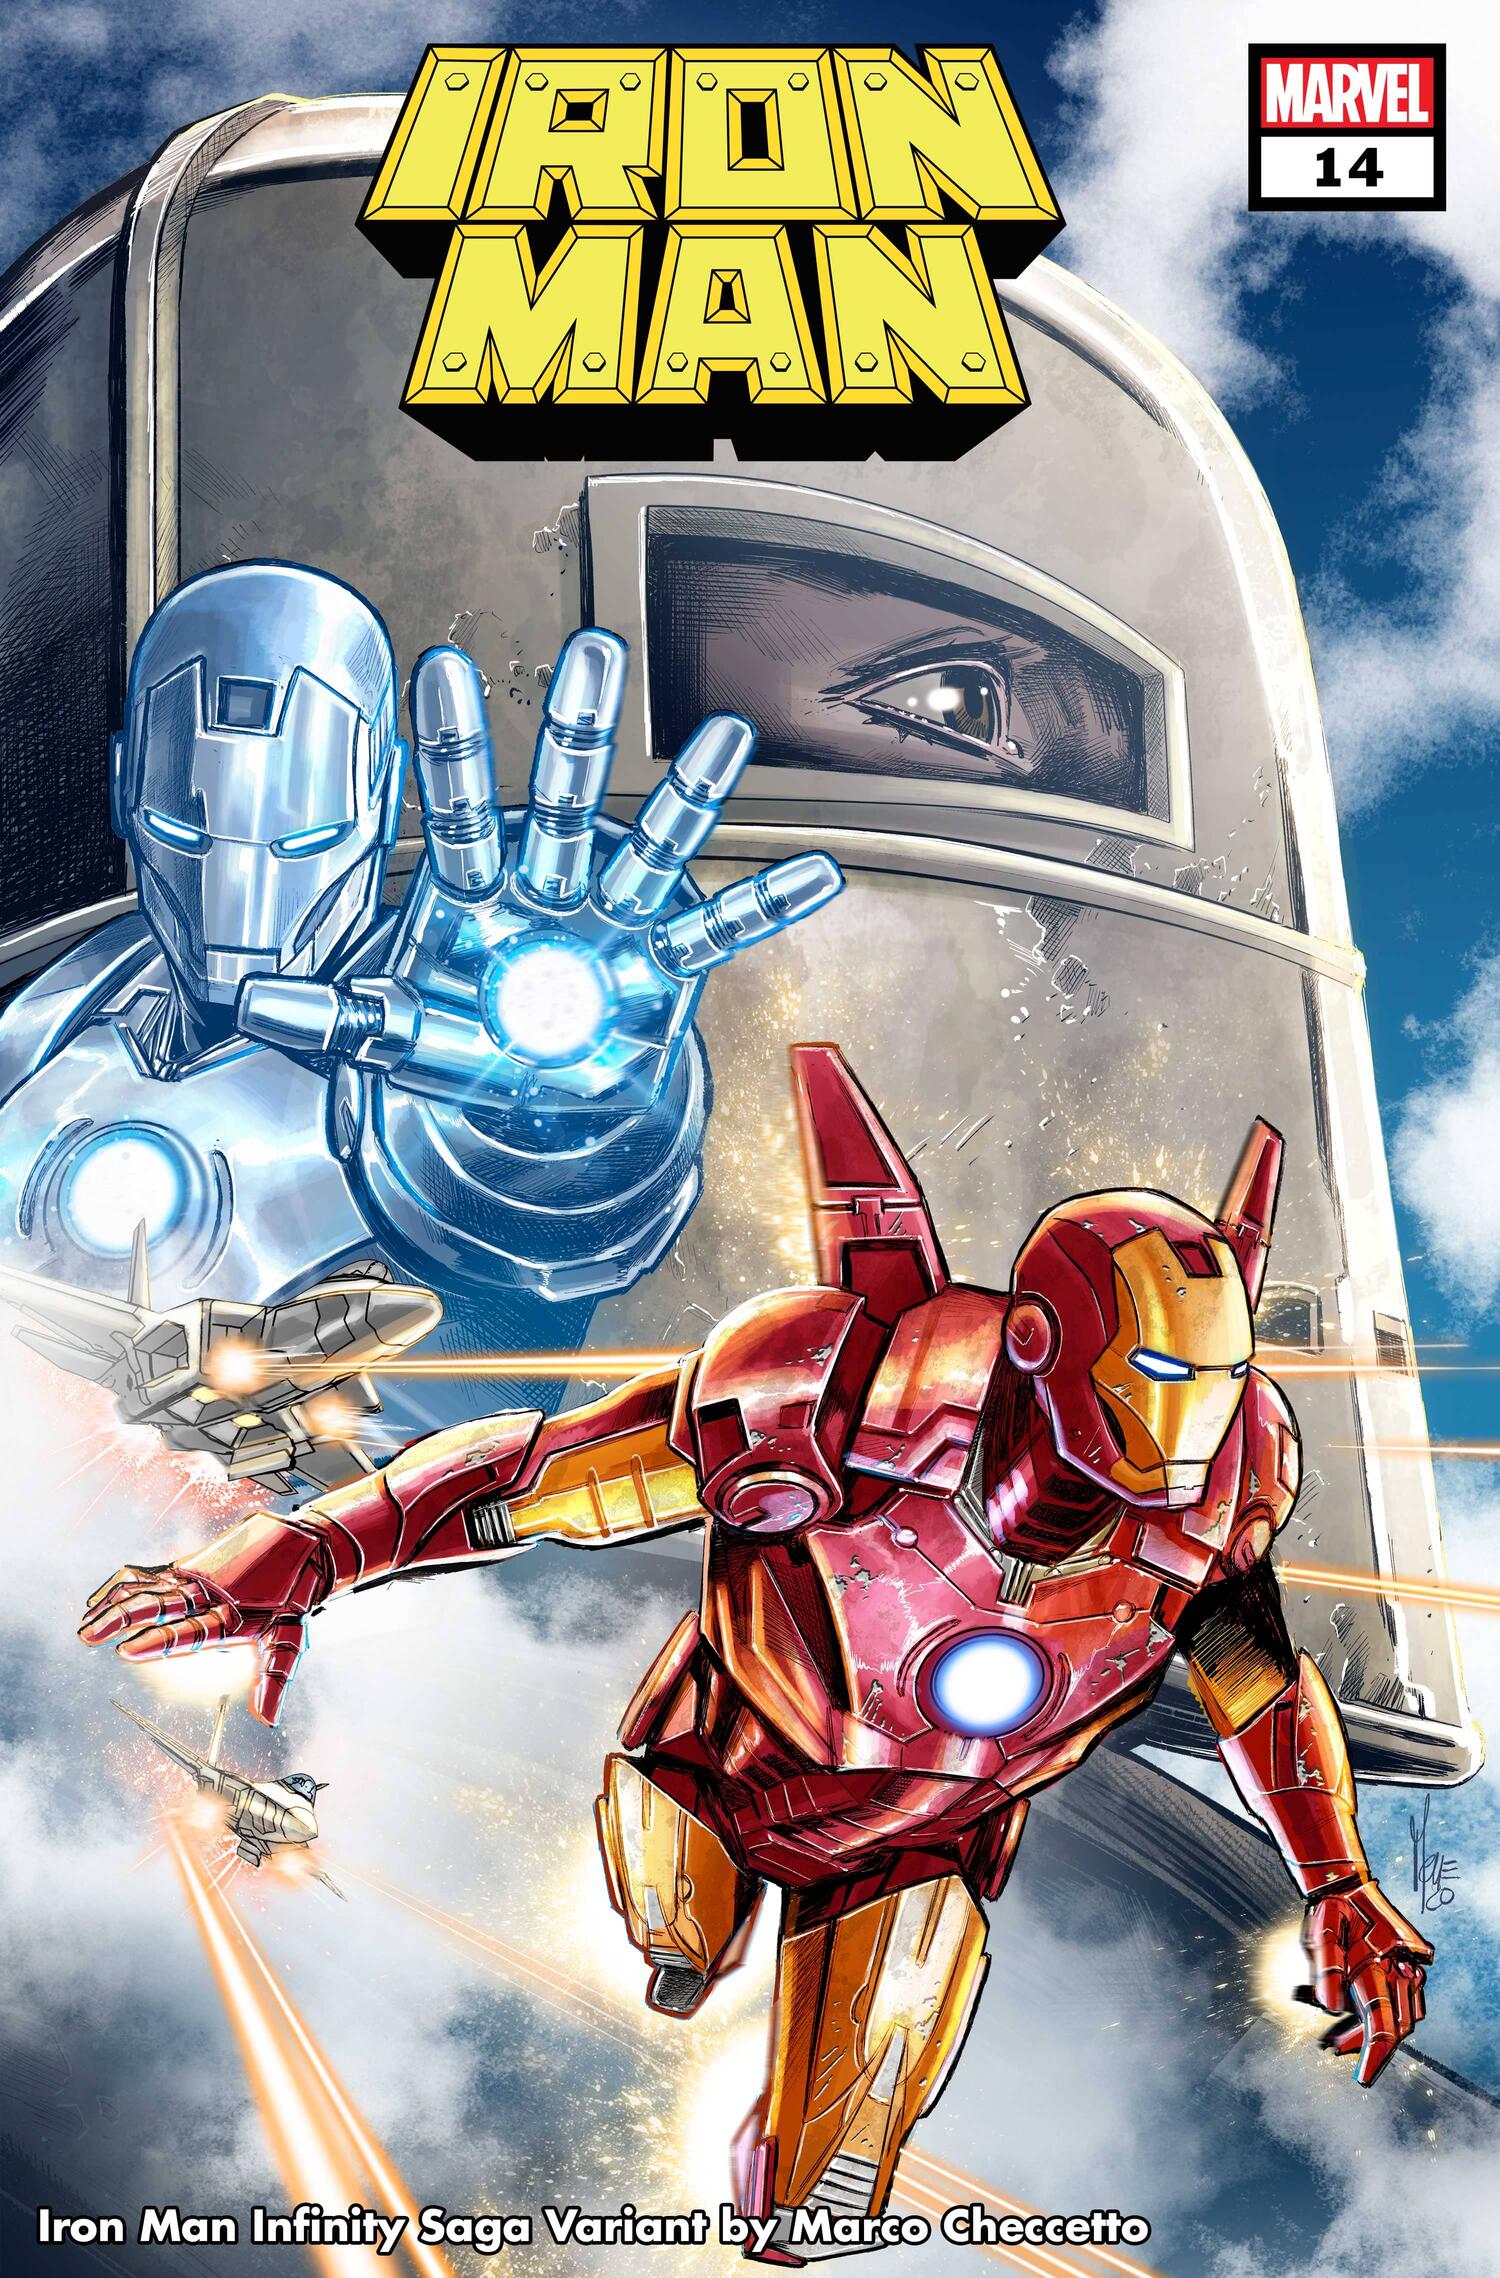 IRON MAN #14 INFINITY SAGA VARIANT COVER by MARCO CHECCETTO